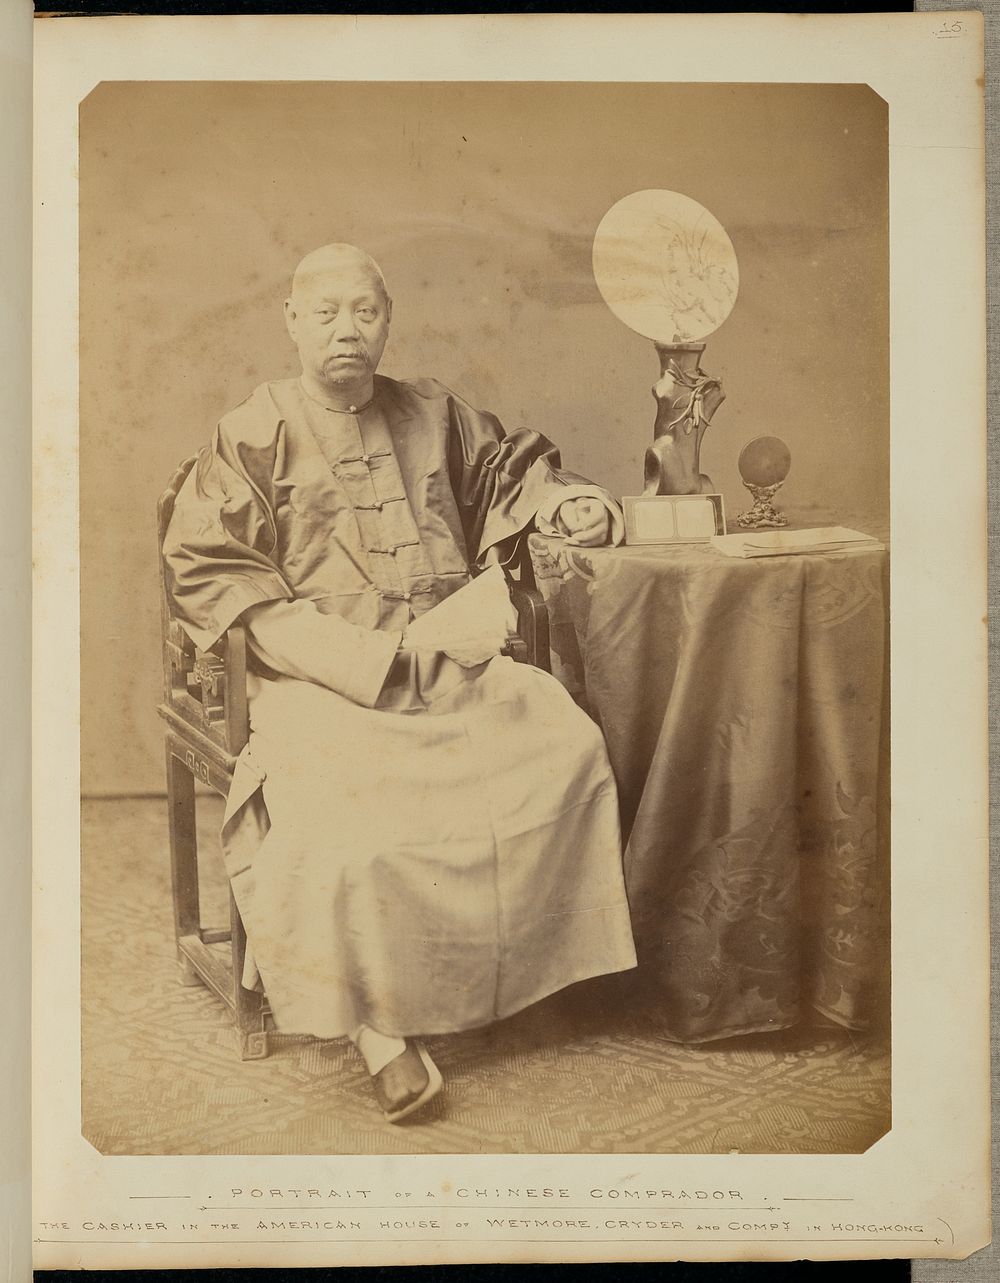 Portrait of a Chinese Comprador - The Cashier in the American House of Wetmore, Cryder and Company in Hong-Kong by William…